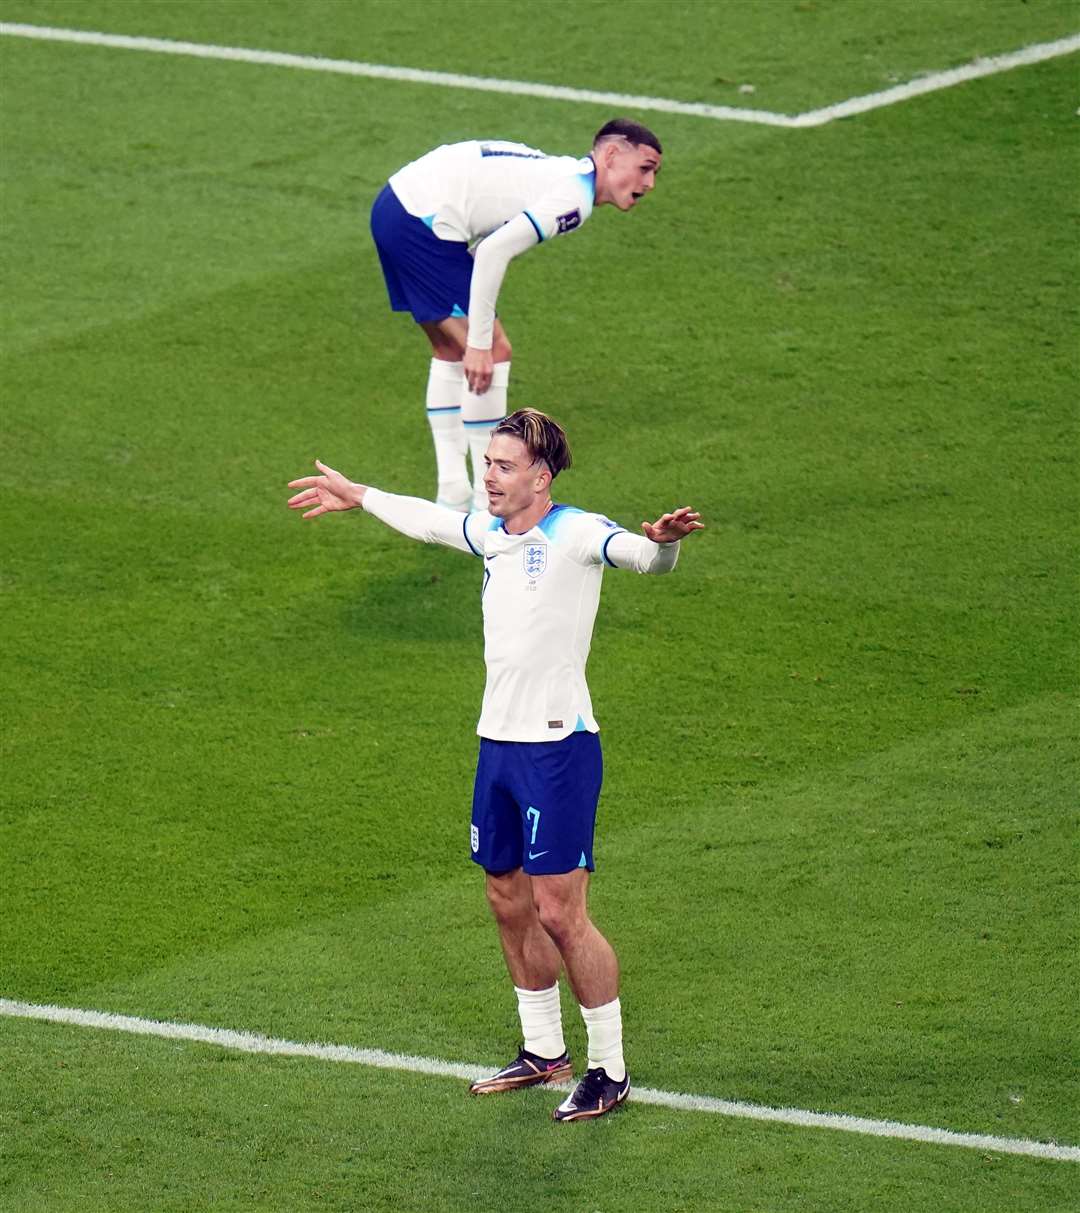 Grealish honoured 11-year-old Finlay with his celebration against Iran in the World Cup (Adam Davy/PA)